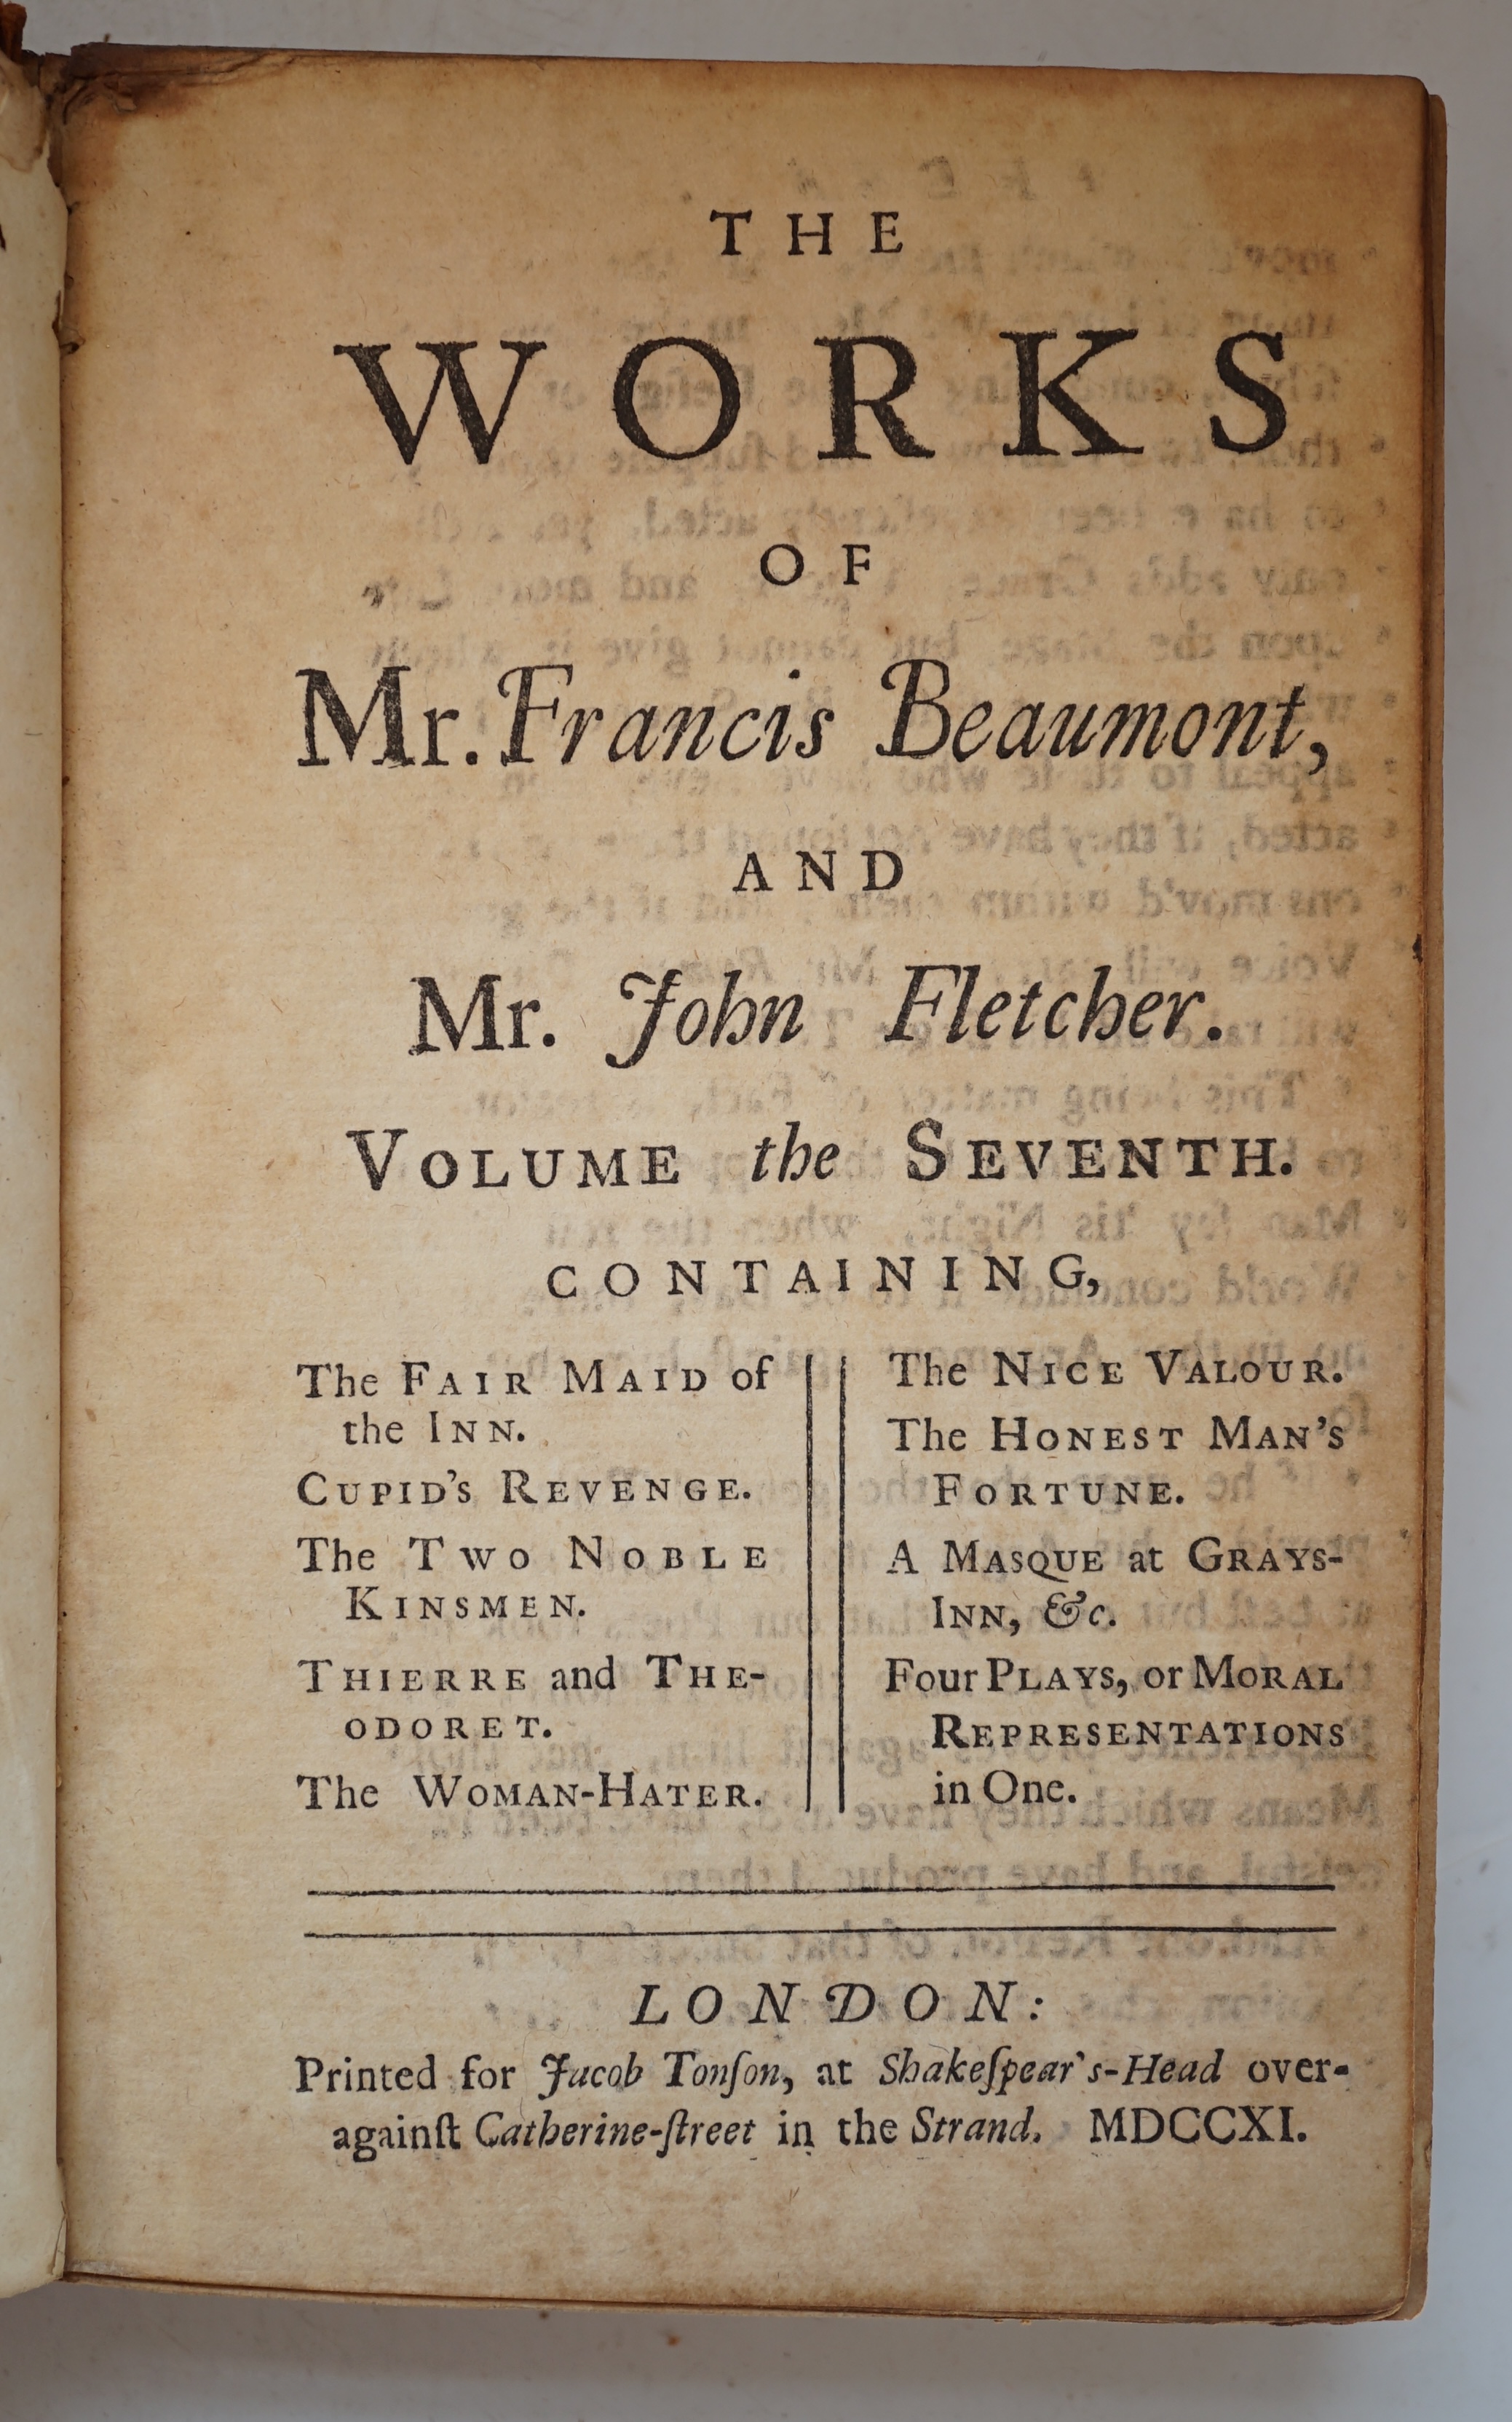 Beaumont, Francis and John Fletcher - The Works of Mr. Francis Beaumont, and John Fletcher, 7 vols, with 2 engraved portraits and 47 plates, 8vo, calf rebacked, vol 6 dated 1750 and lacking 4 plates, Jacob Tonson, London